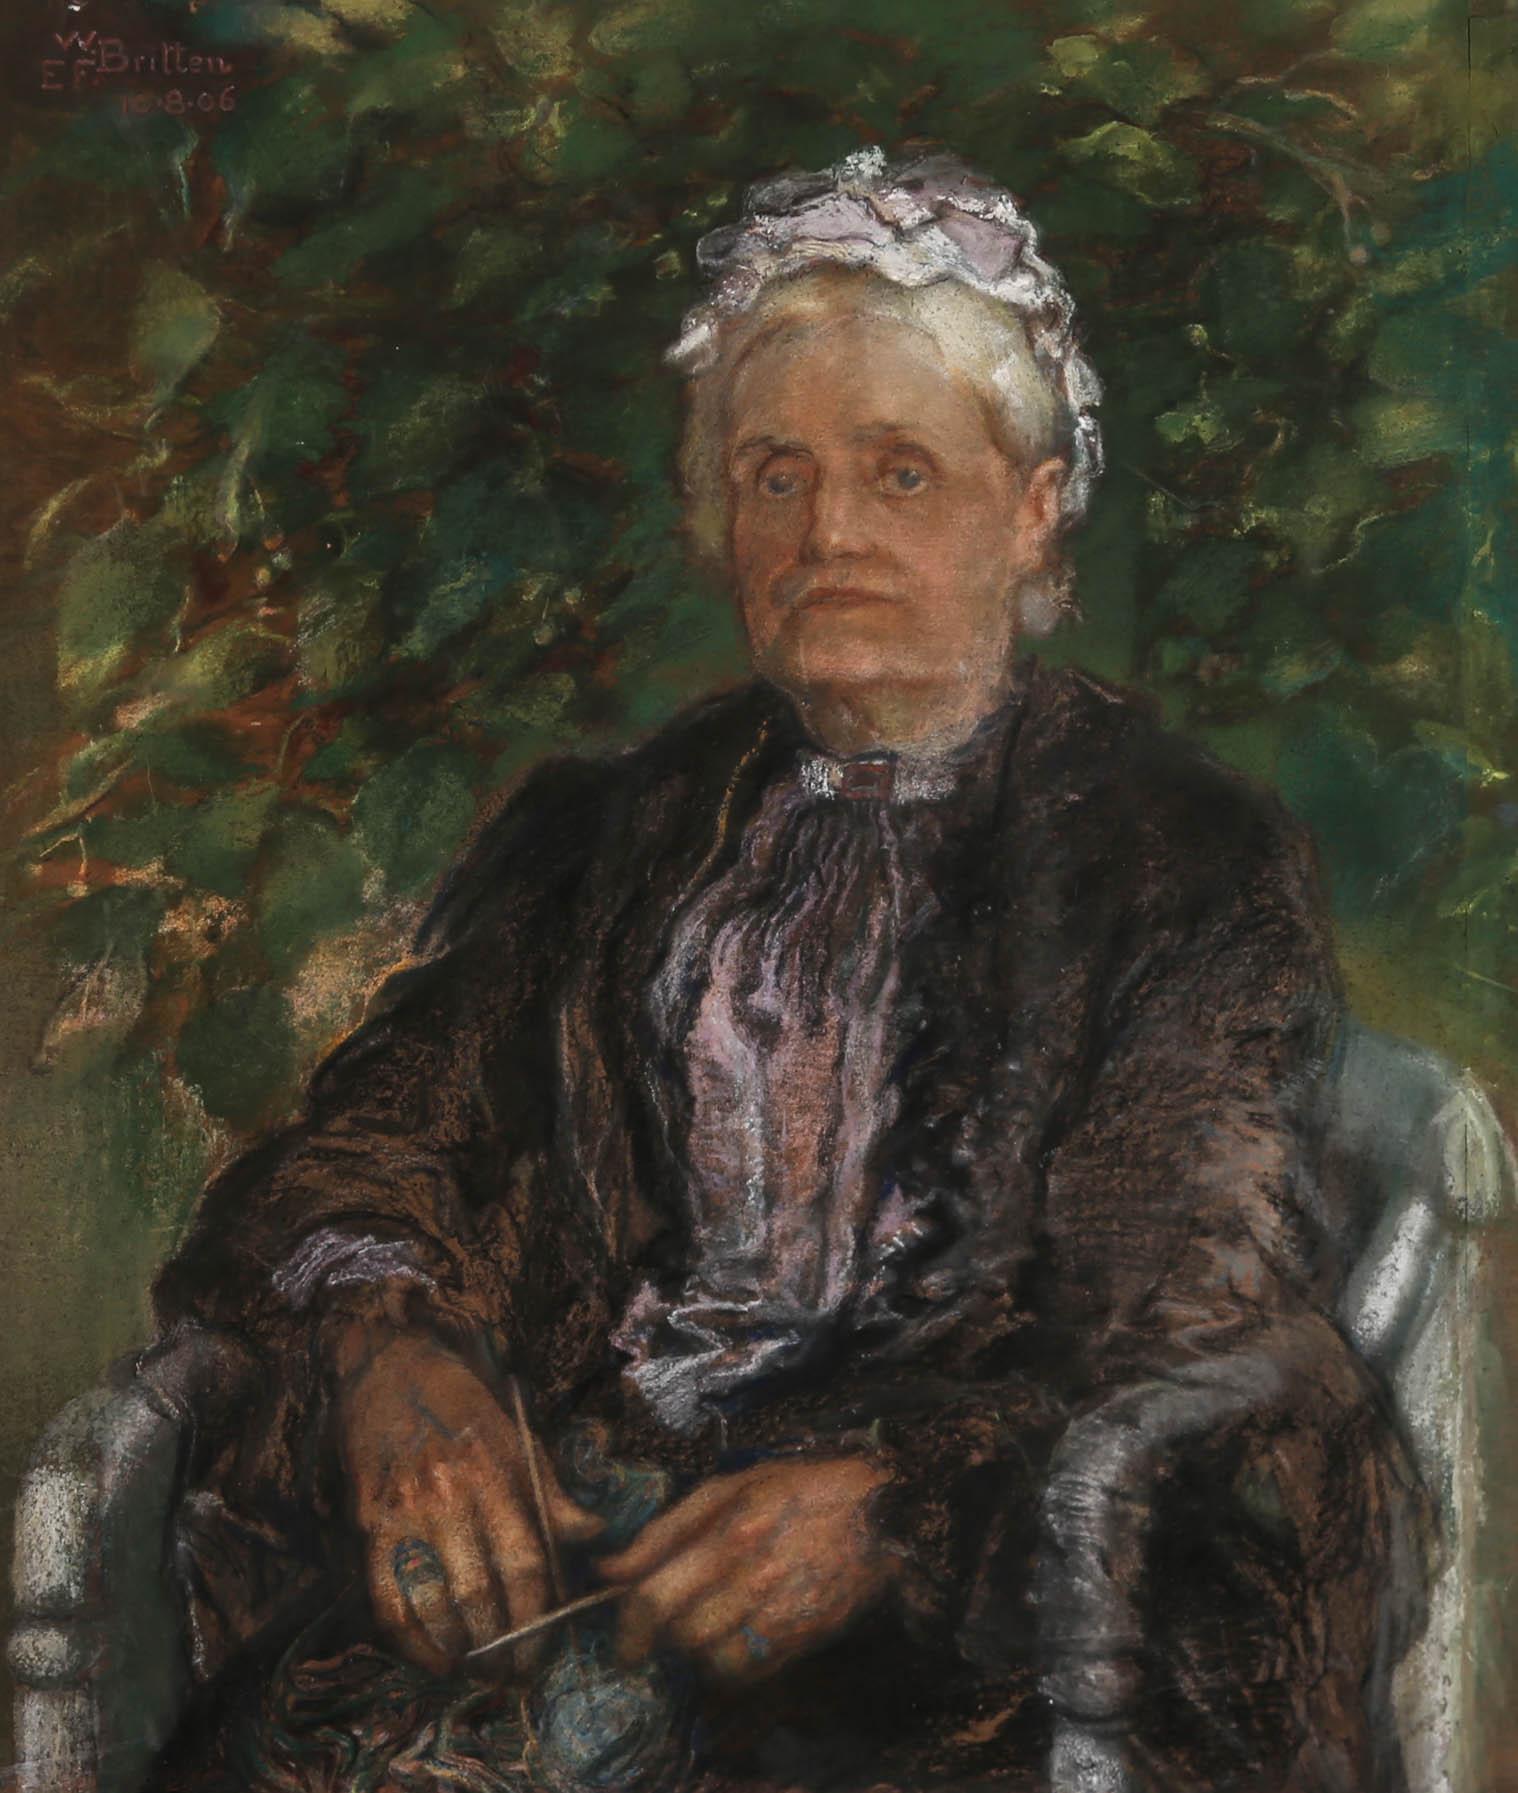 A very fine early 20th Century portrait in delicate pastel, showing a refined older woman in elegant black dress with a white lace cap. She holds her knitting in her lap as she gazes off into the distance. The portrait has a beautiful haziness about